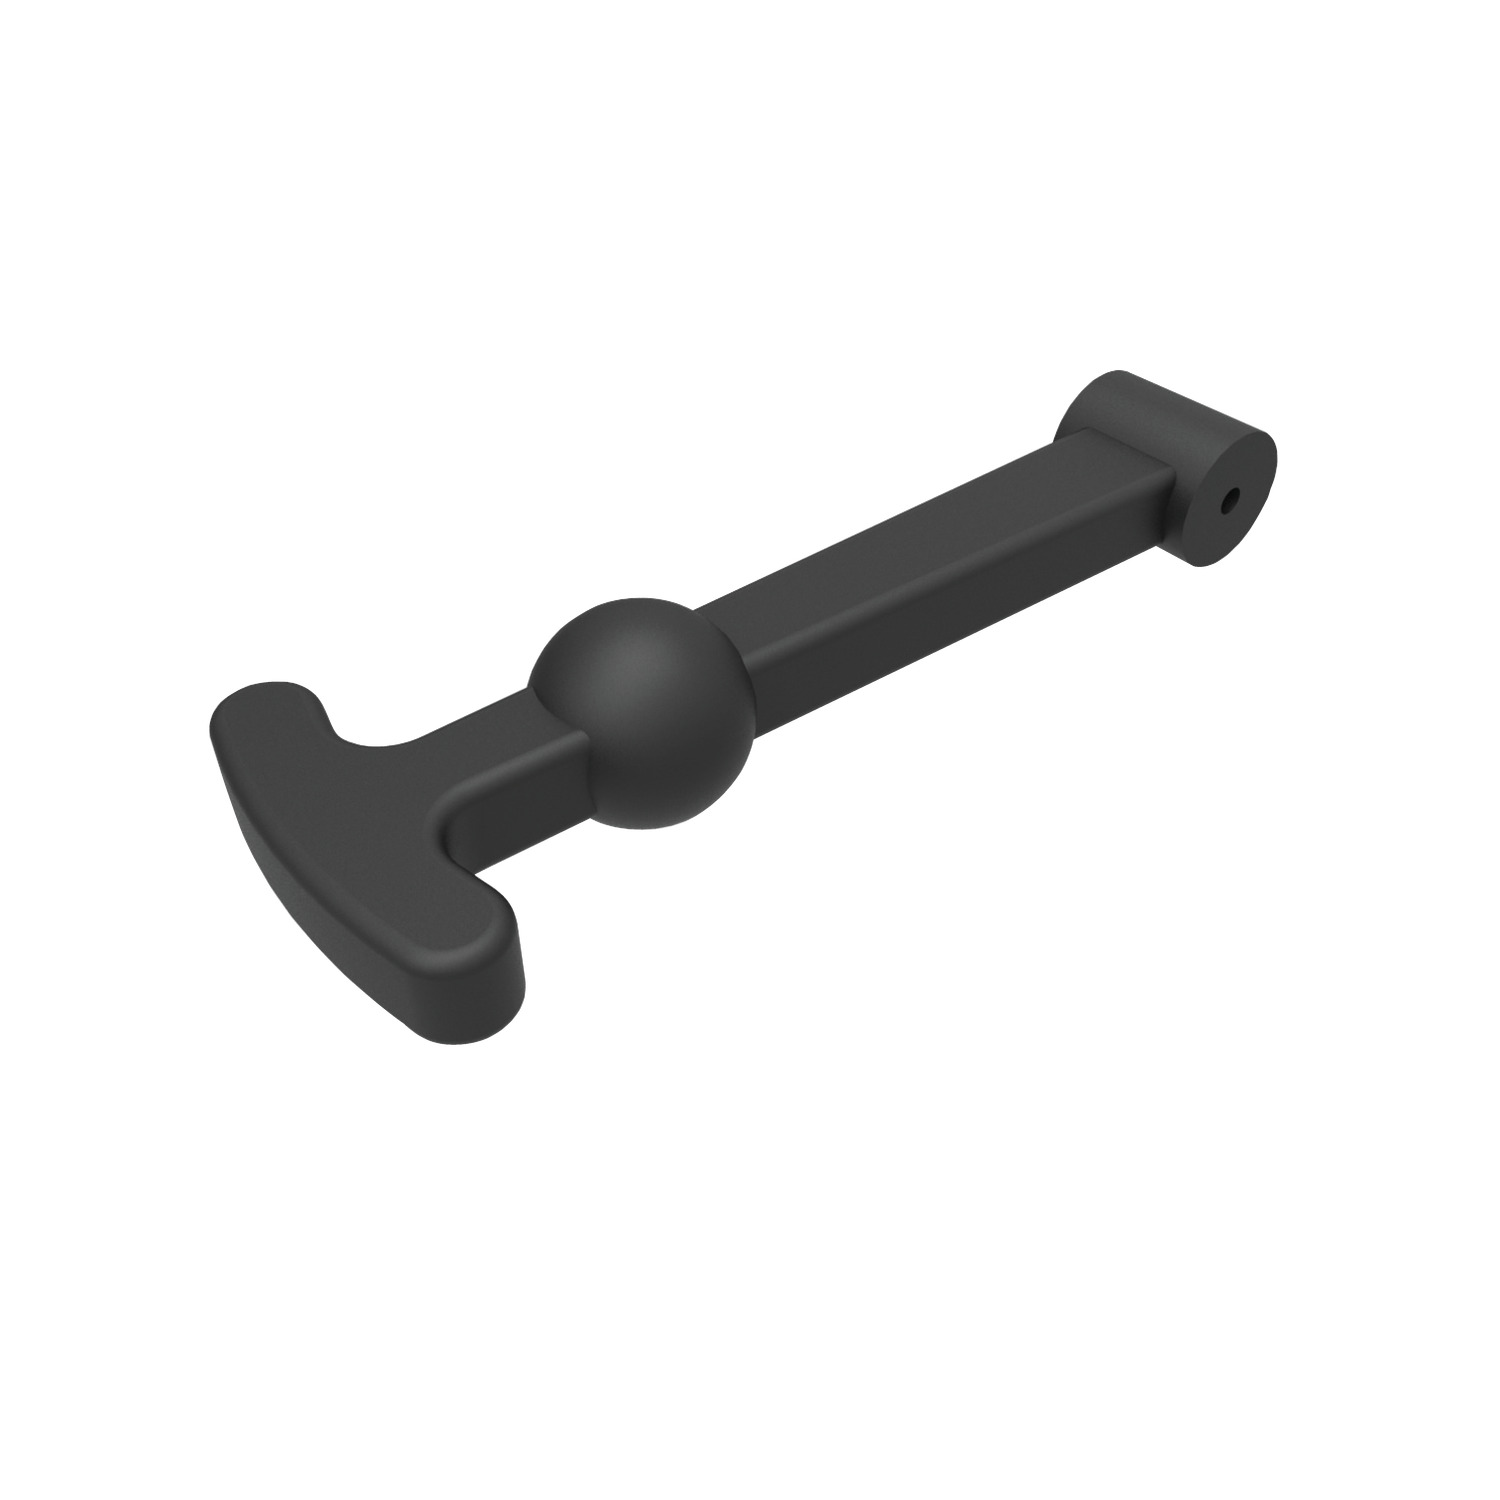 J0710.AC0010 Draw Latch flexible - T-handle Anchor Plate. Also known as 49420.W0010. Supplied in multiples of 10 Sold in multiples of 10